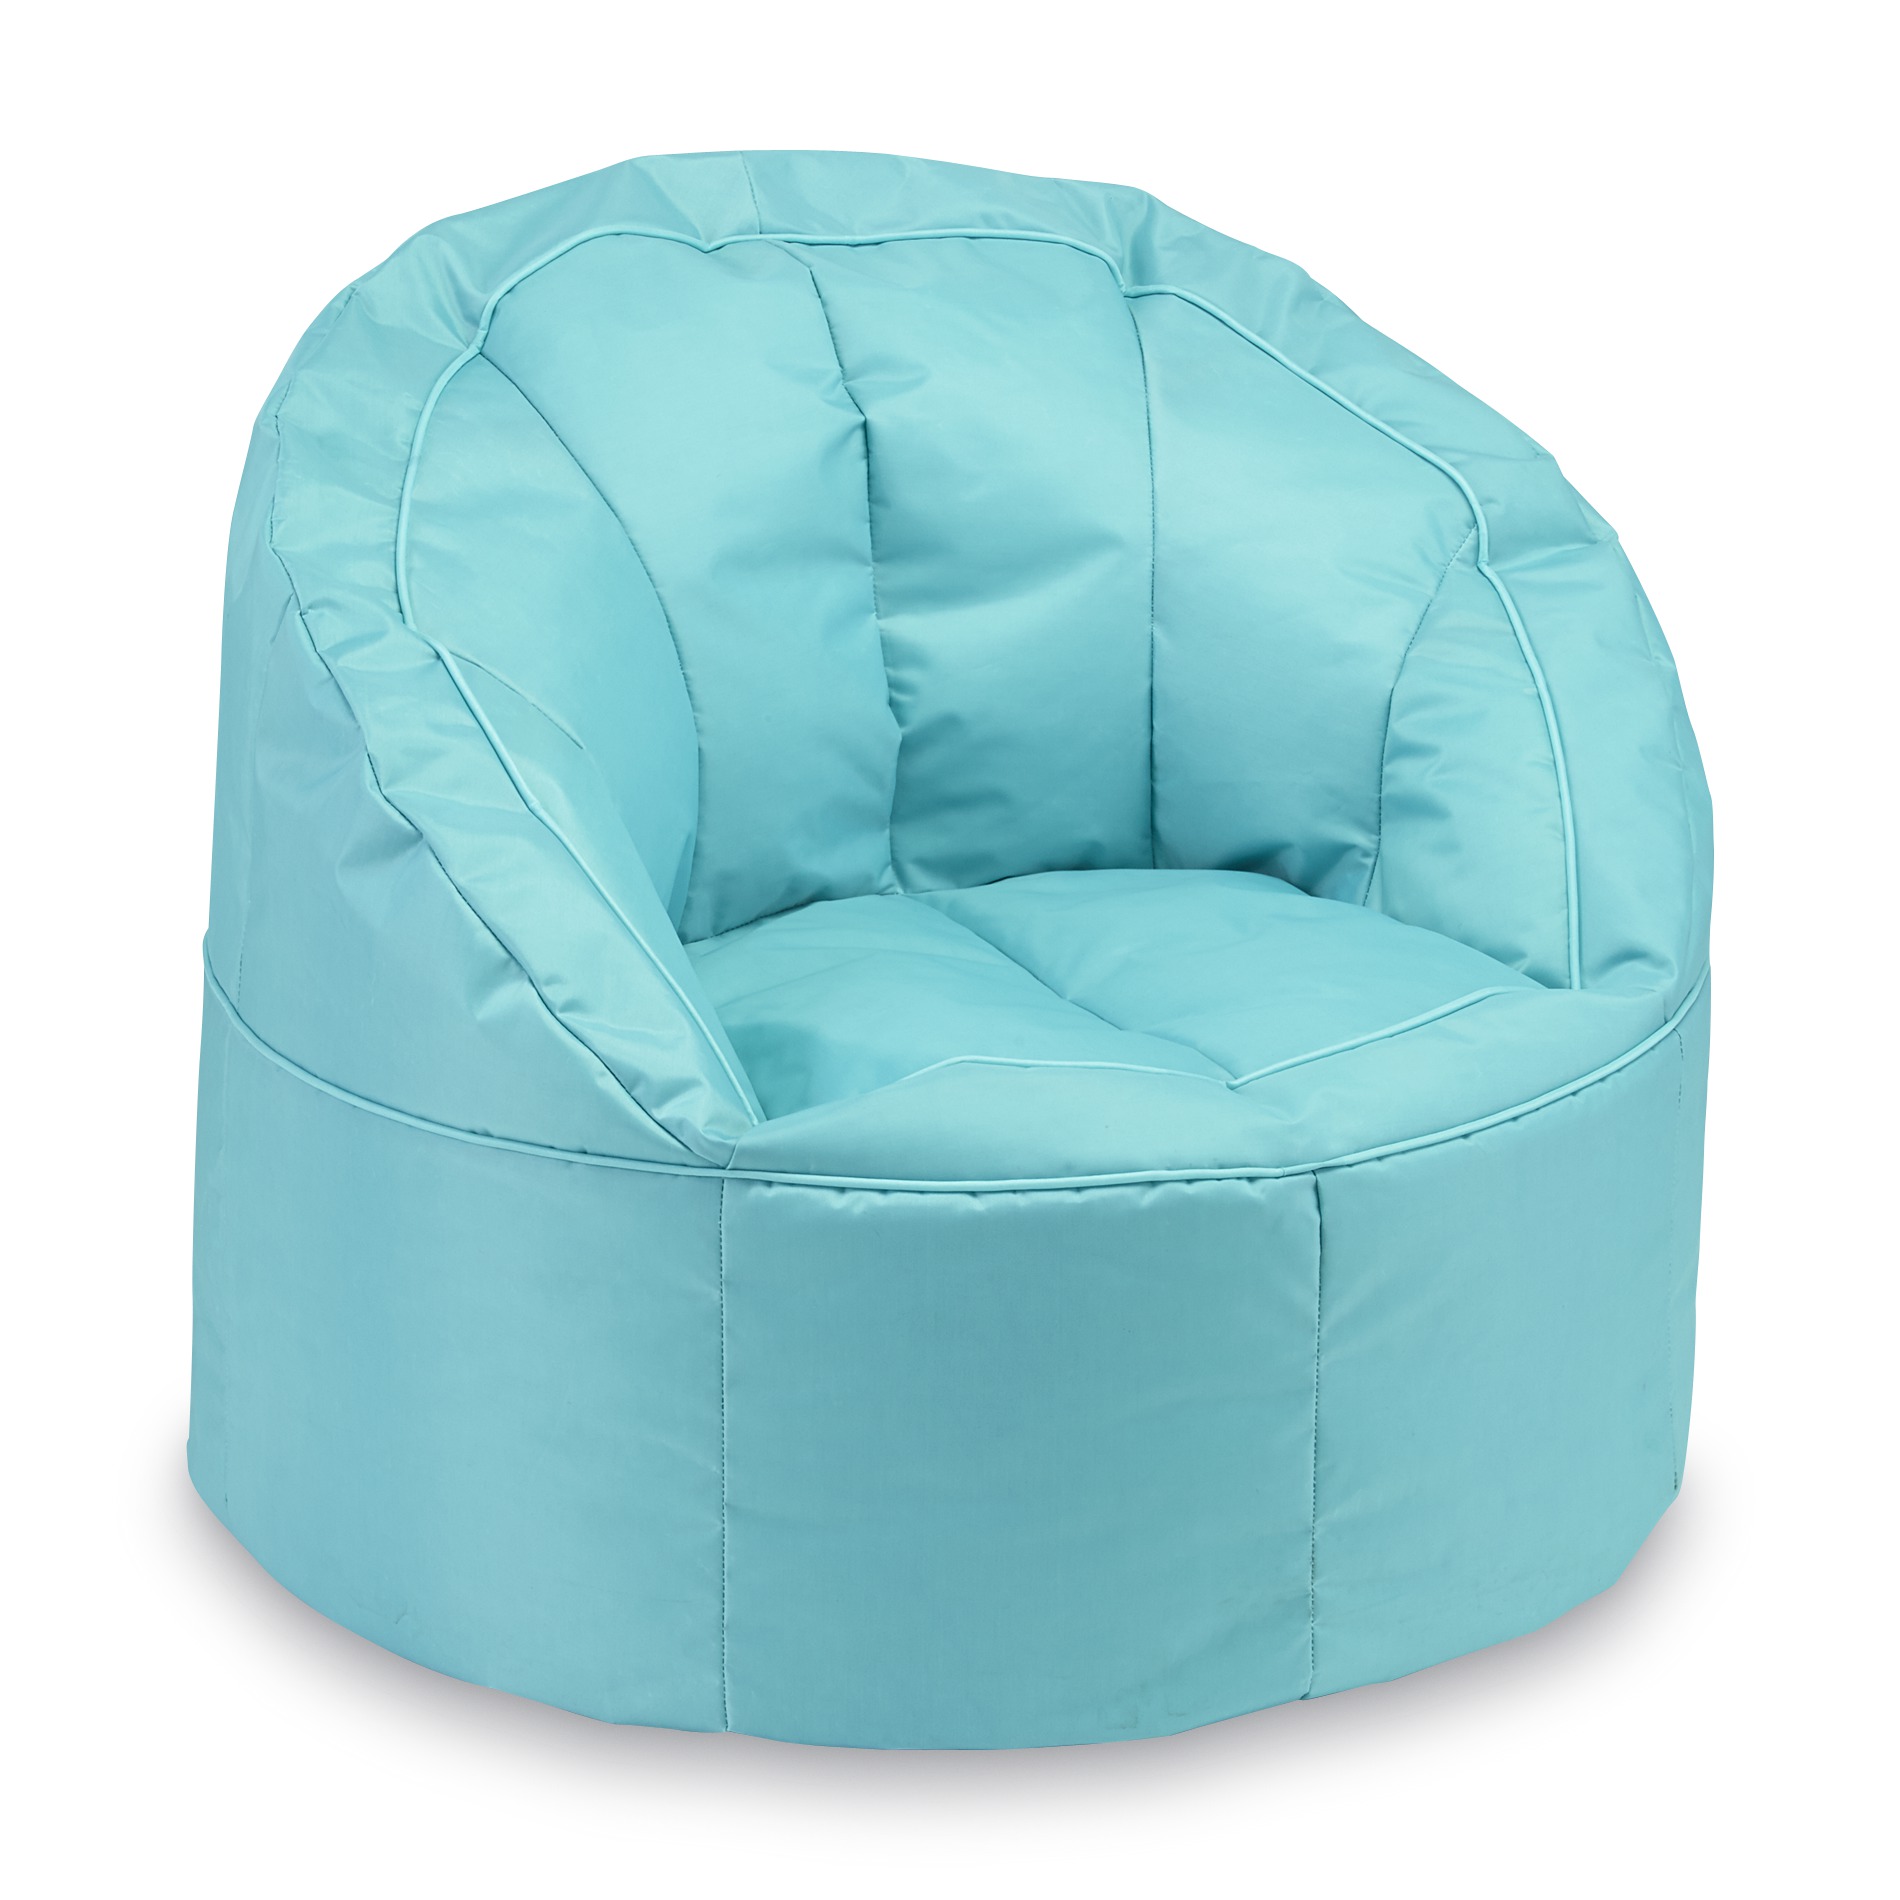 Adult Bean Bag Chair | Shop Your Way: Online Shopping & Earn Points on Tools, Appliances ...